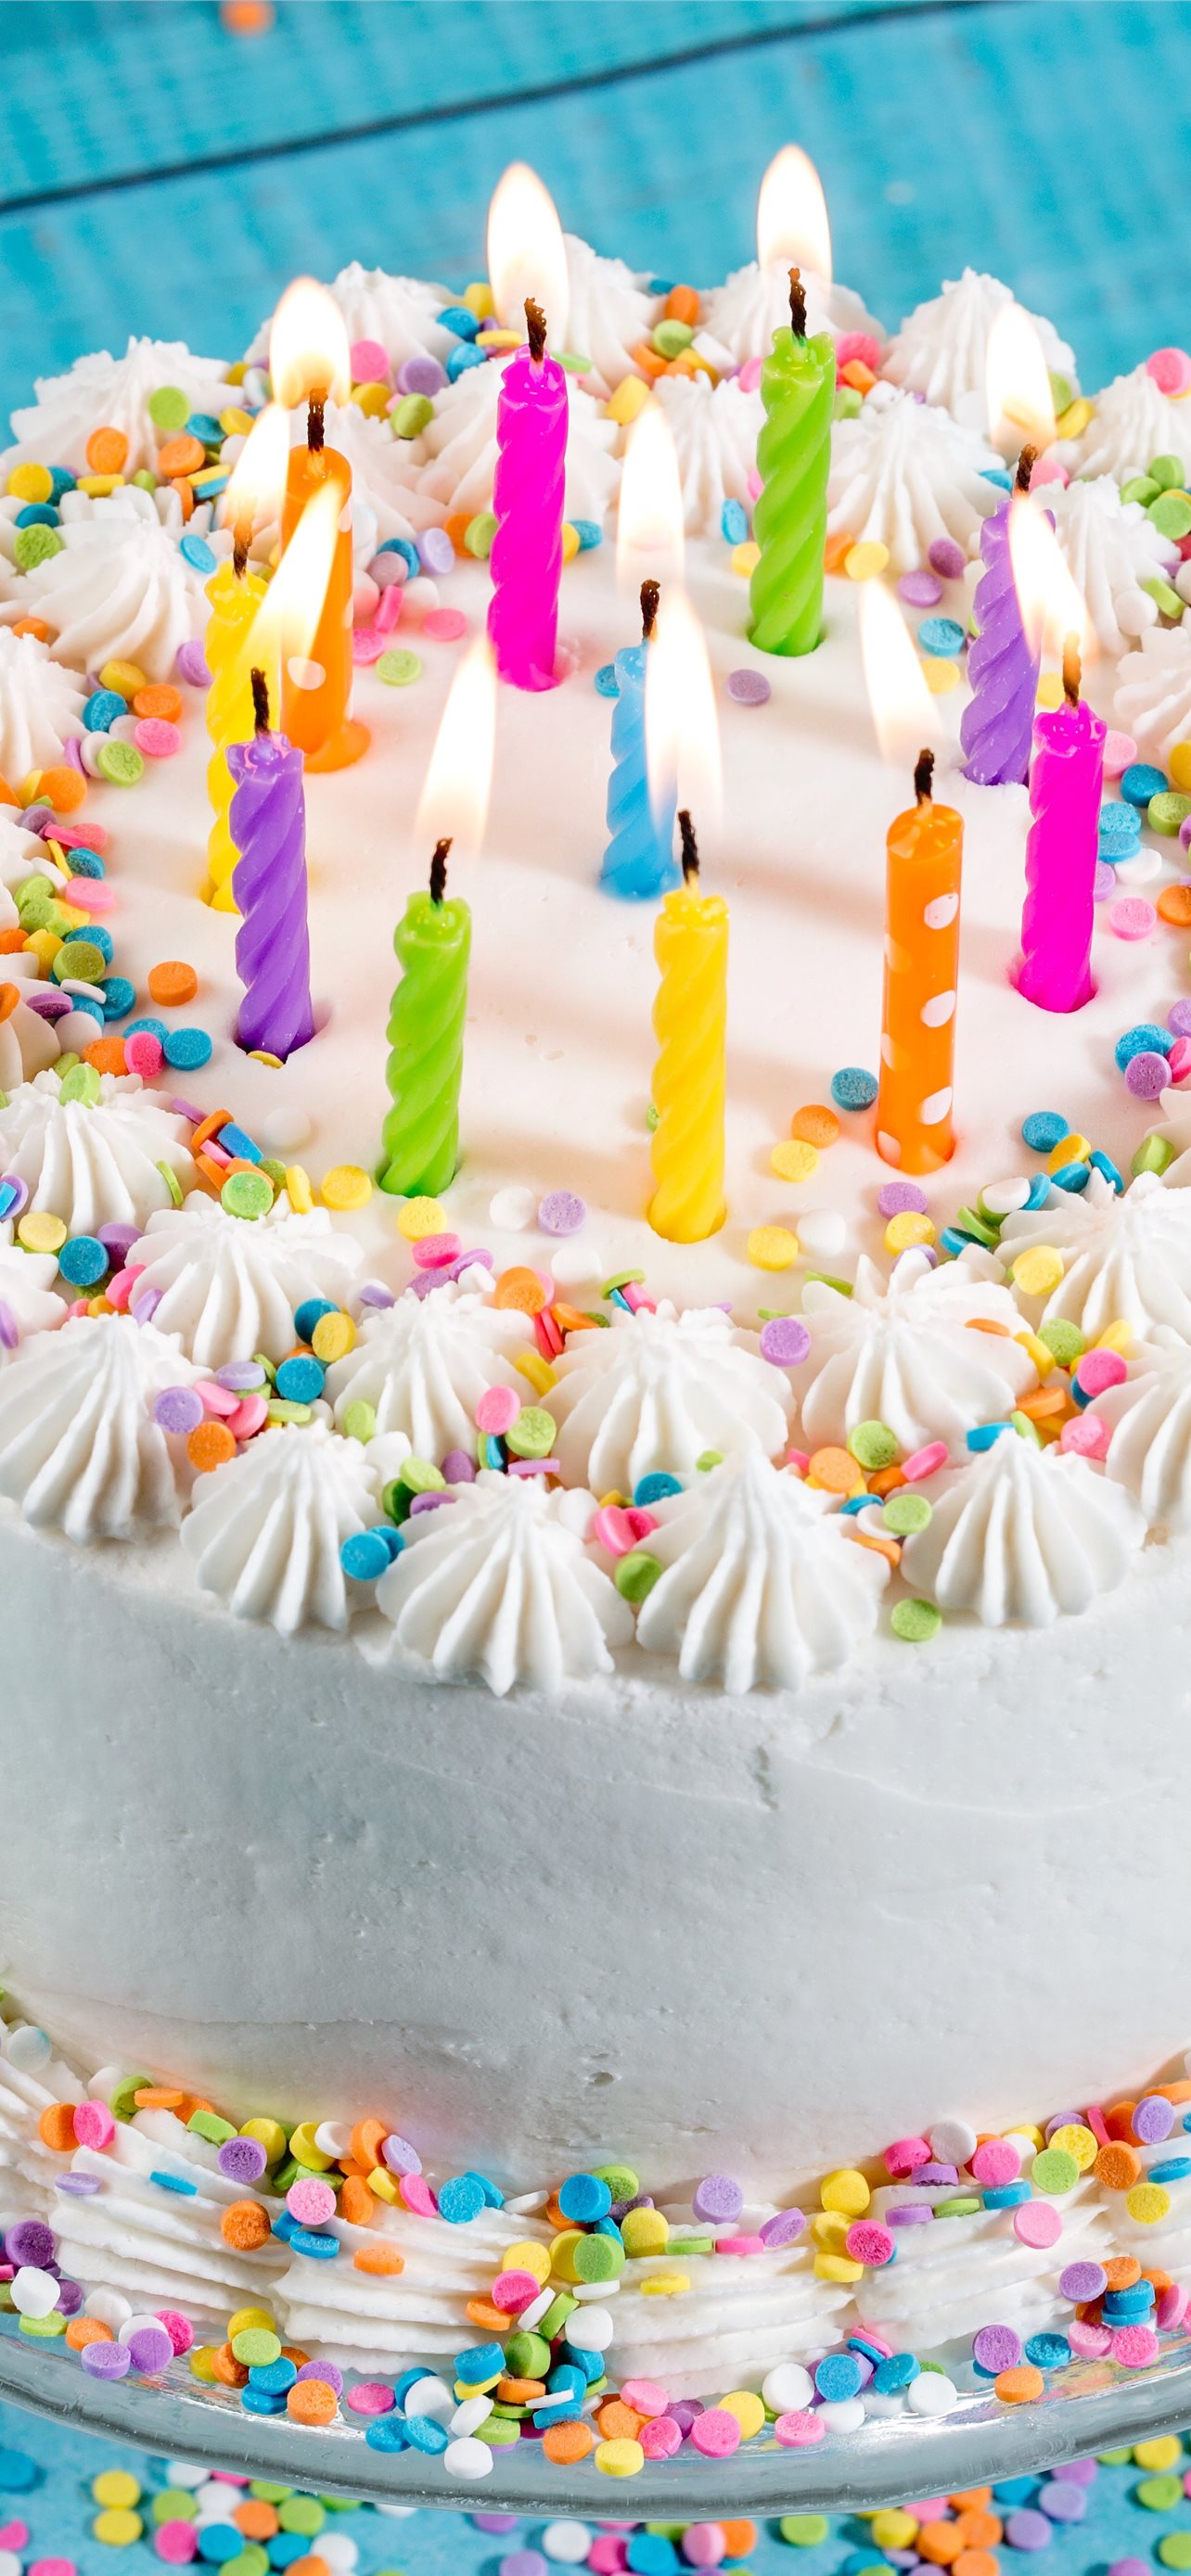 8776 Birthday Cake Stock Videos Footage  4K Video Clips  Getty Images